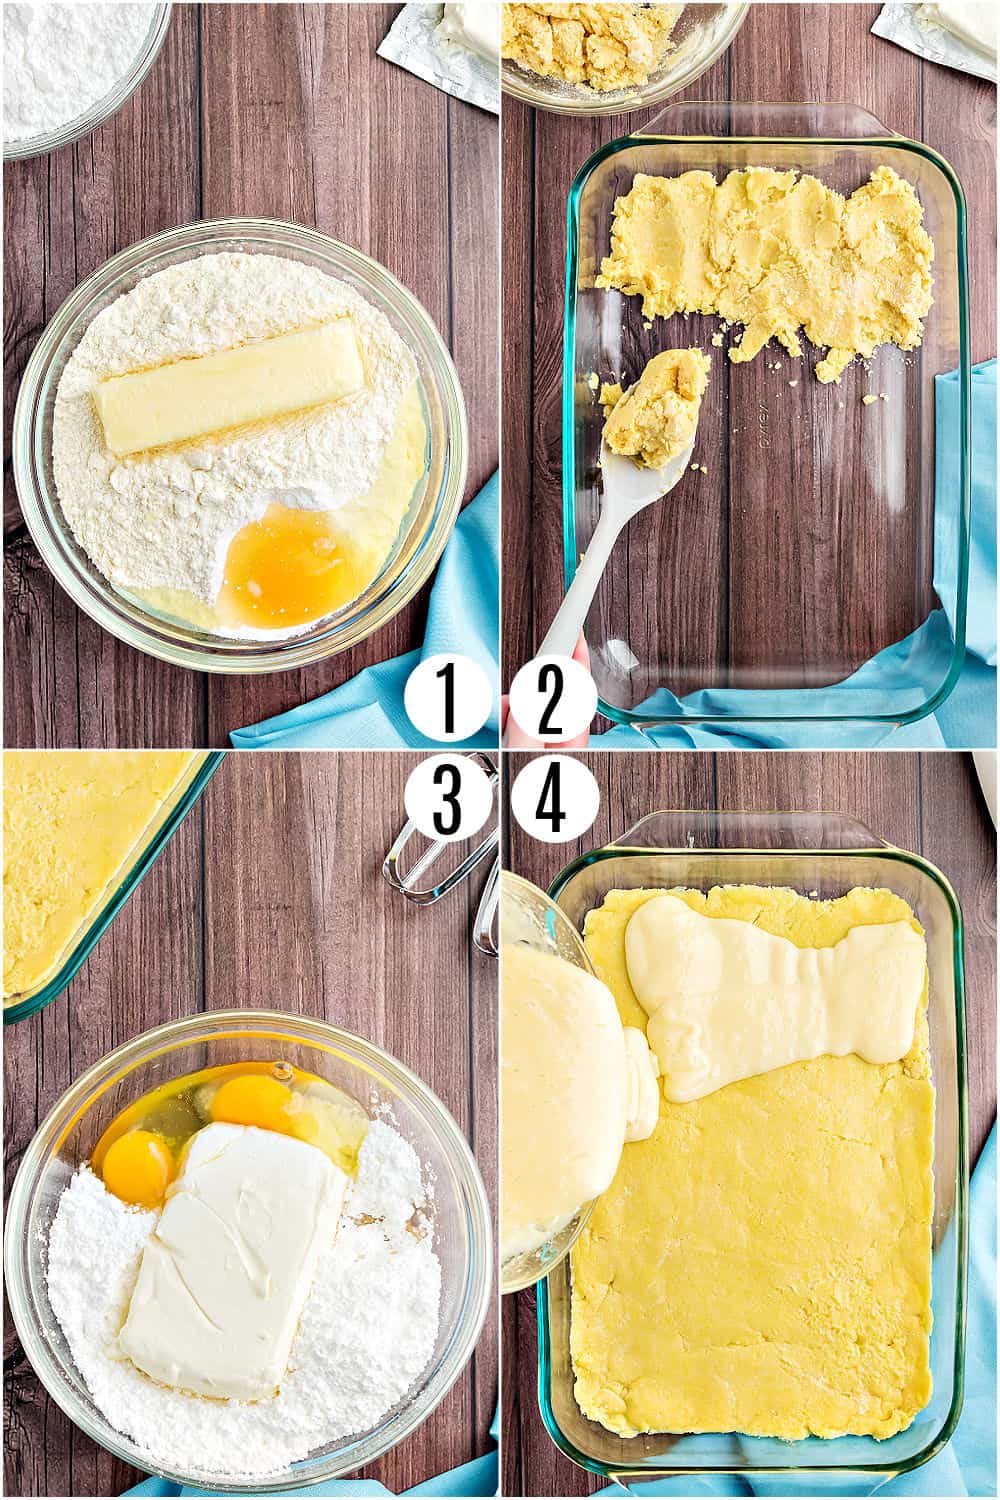 Step by step photos showing how to make lemon cake bars.